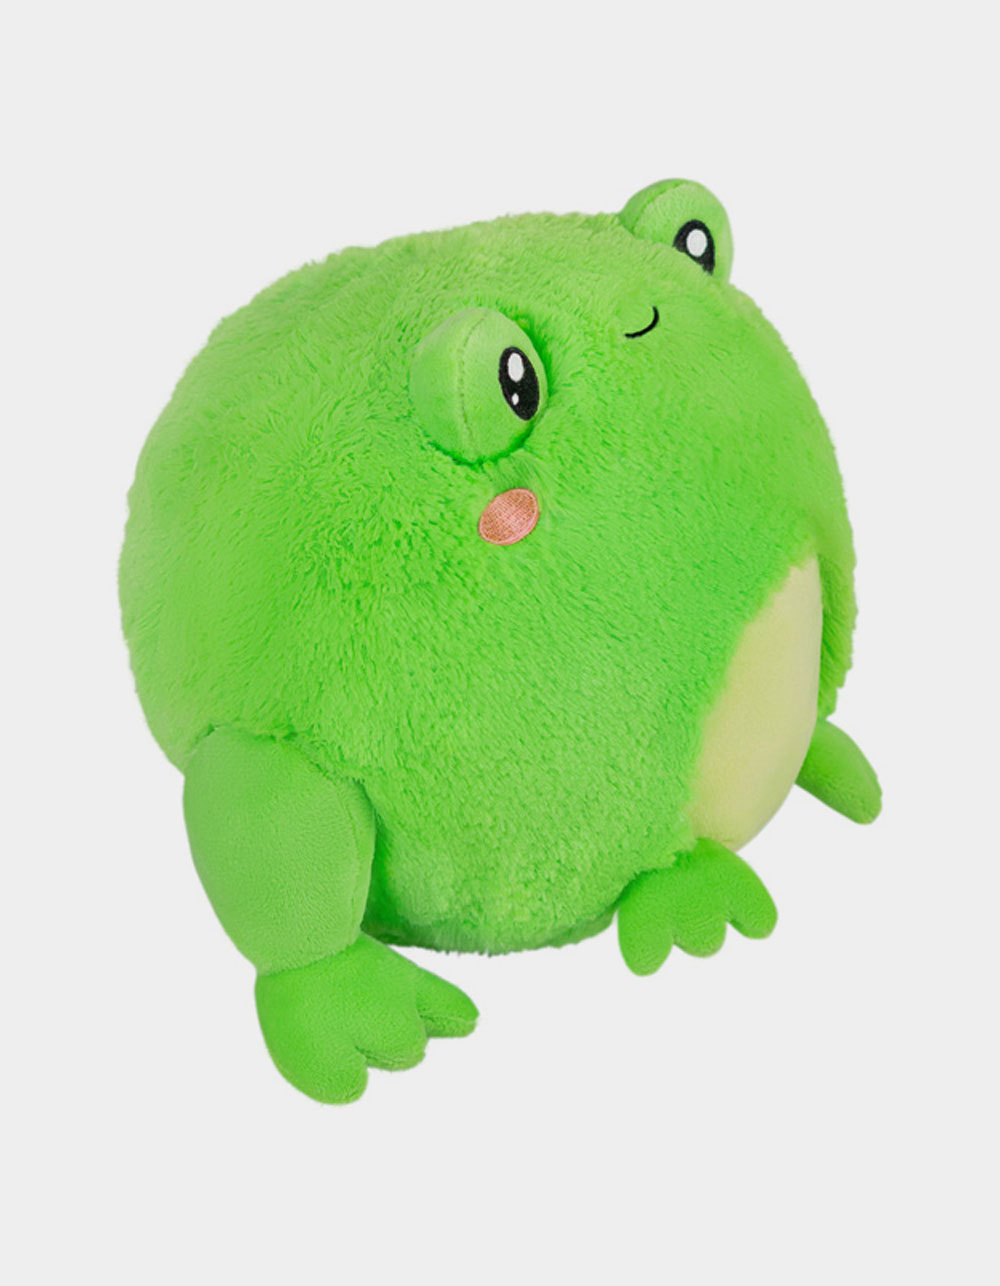 SQUISHABLE Mini Squishable Frog Plush Toy - GREEN COMBO | Tillys